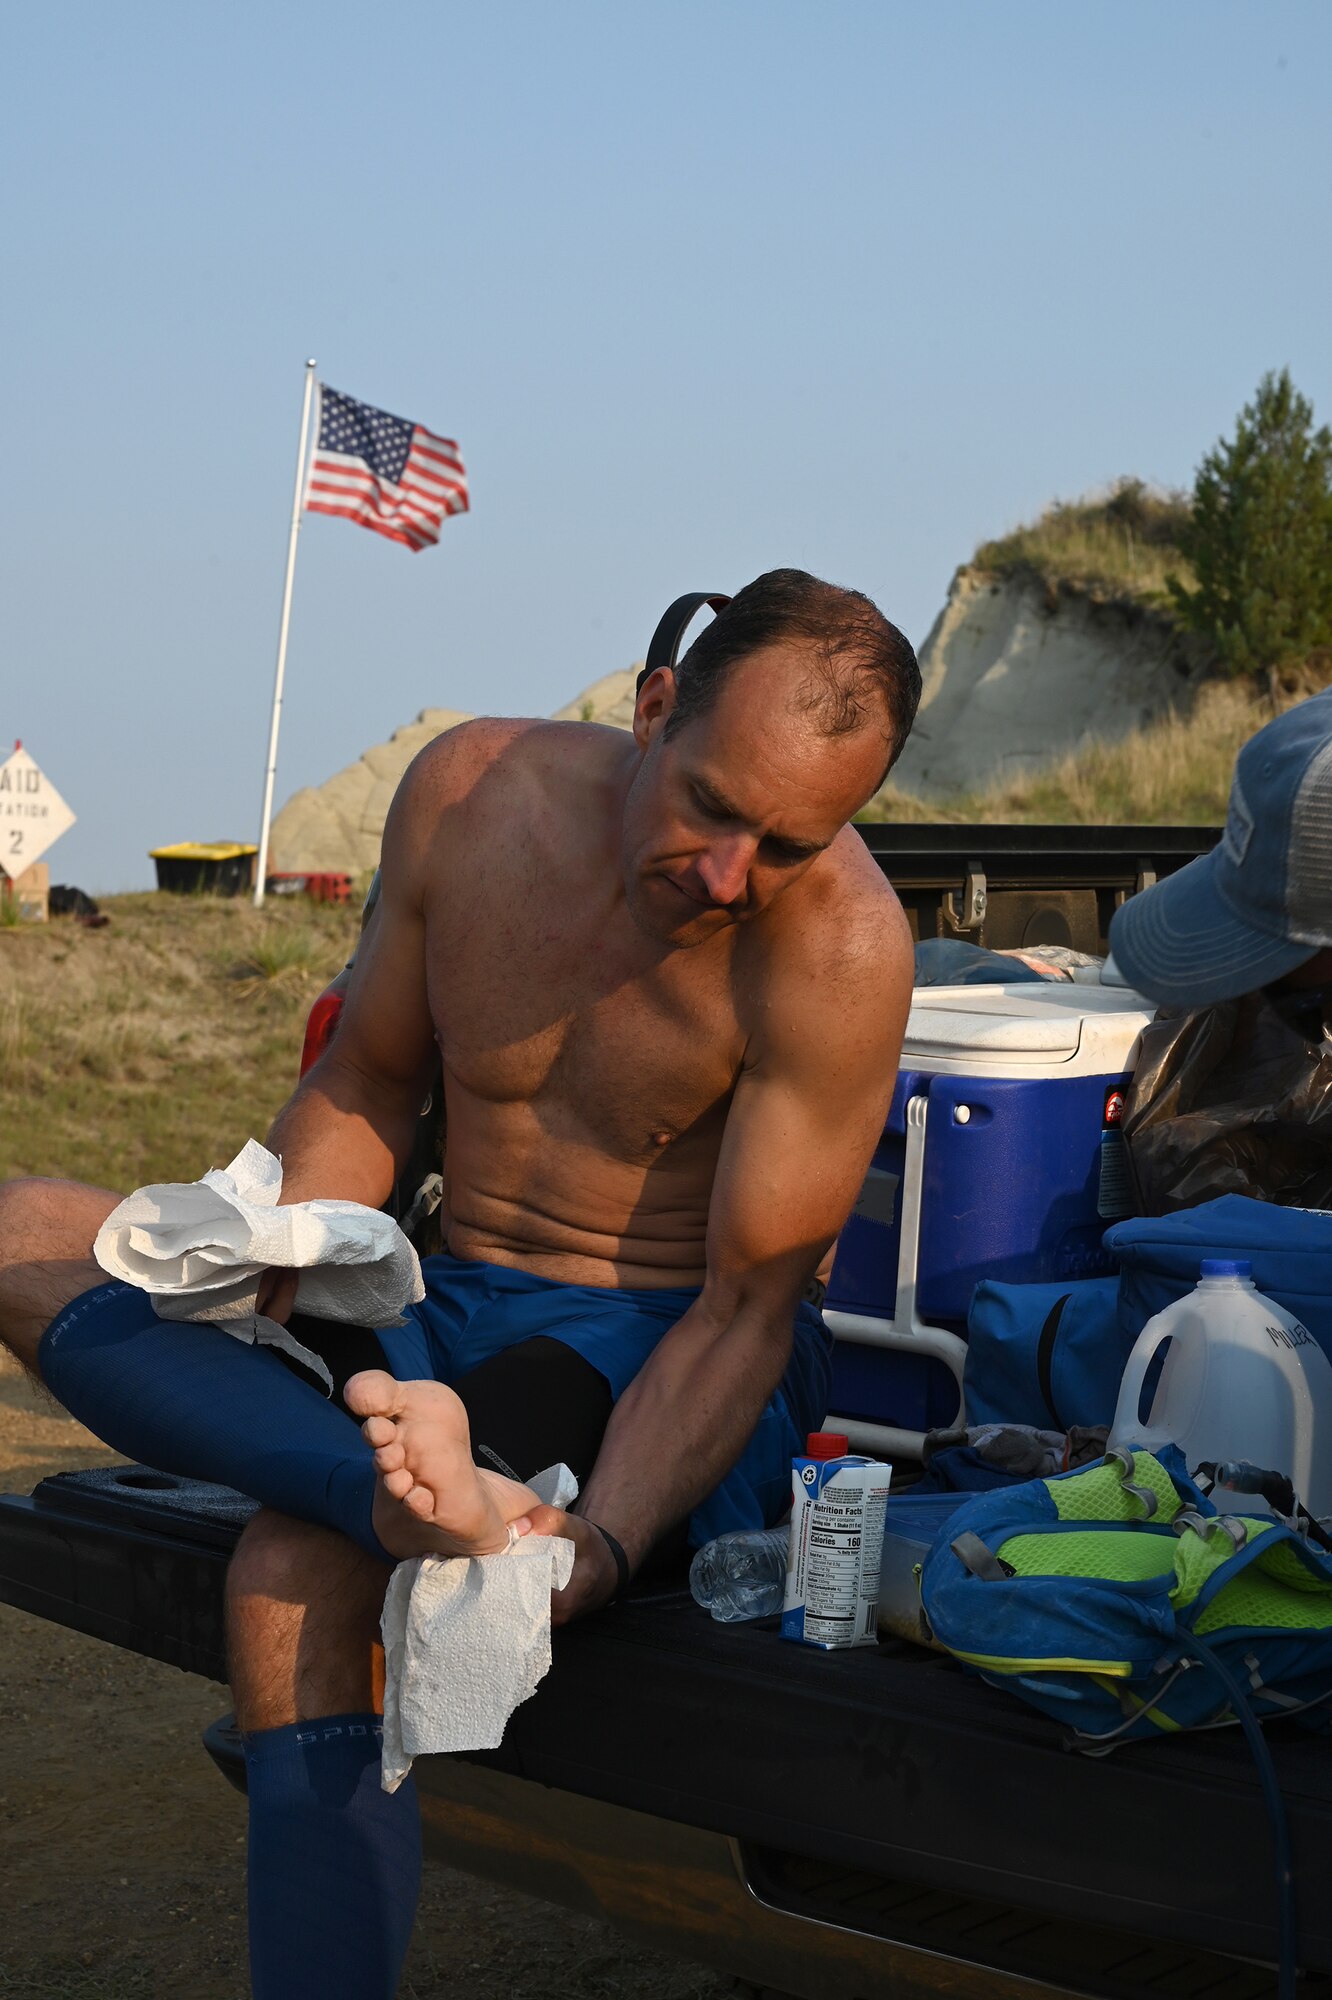 Senior Master Sgt. Brandon Miller looks at his bare foot as he rests at a checkpoint location on the Maah Daah Hey Trail 107.3-mile ultramarathon running race in the North Dakota badlands July, 31, 2021.